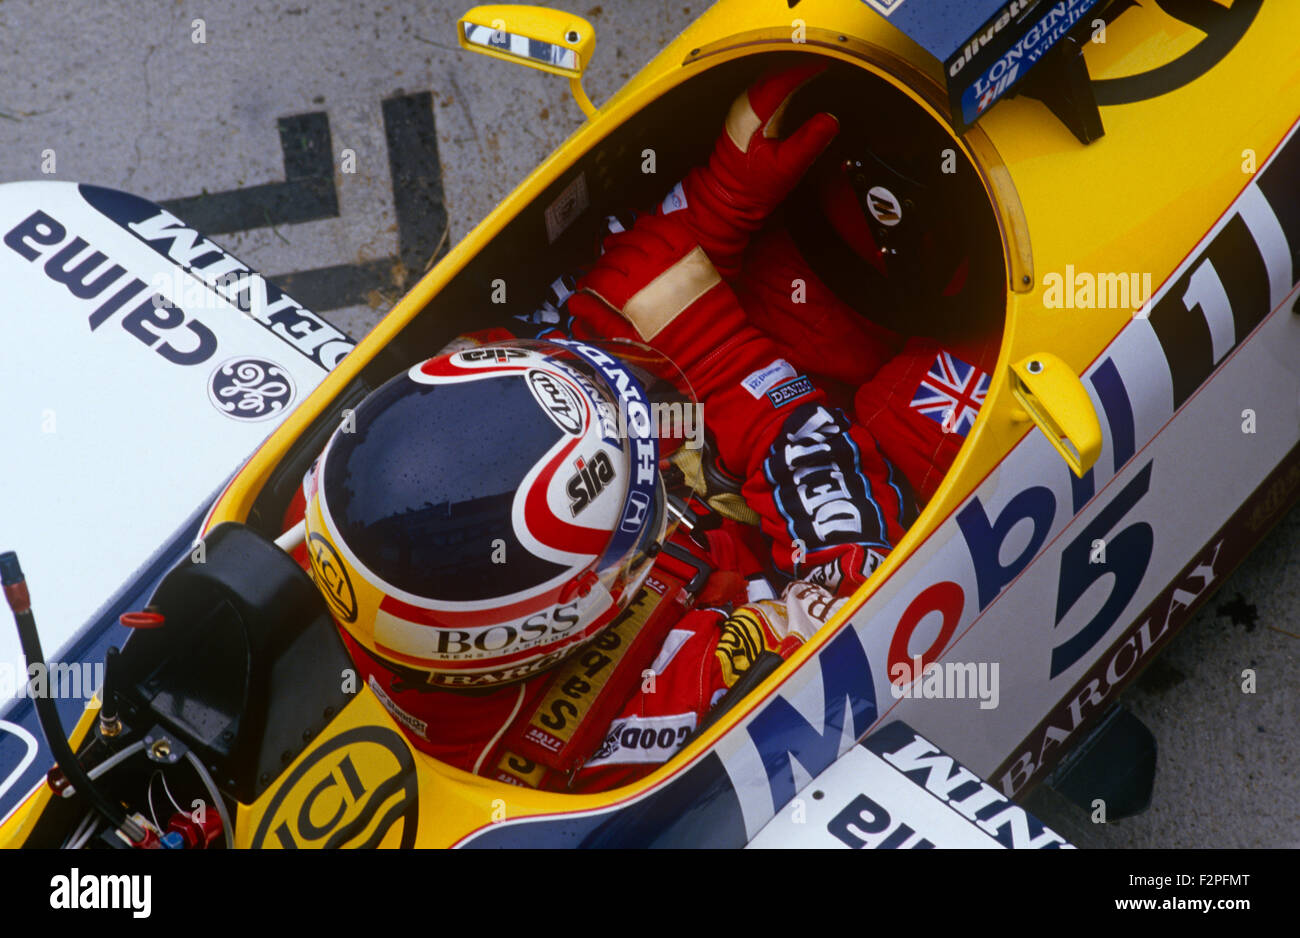 Nigel Mansell In Williams Honda High Resolution Stock Photography And Images Alamy